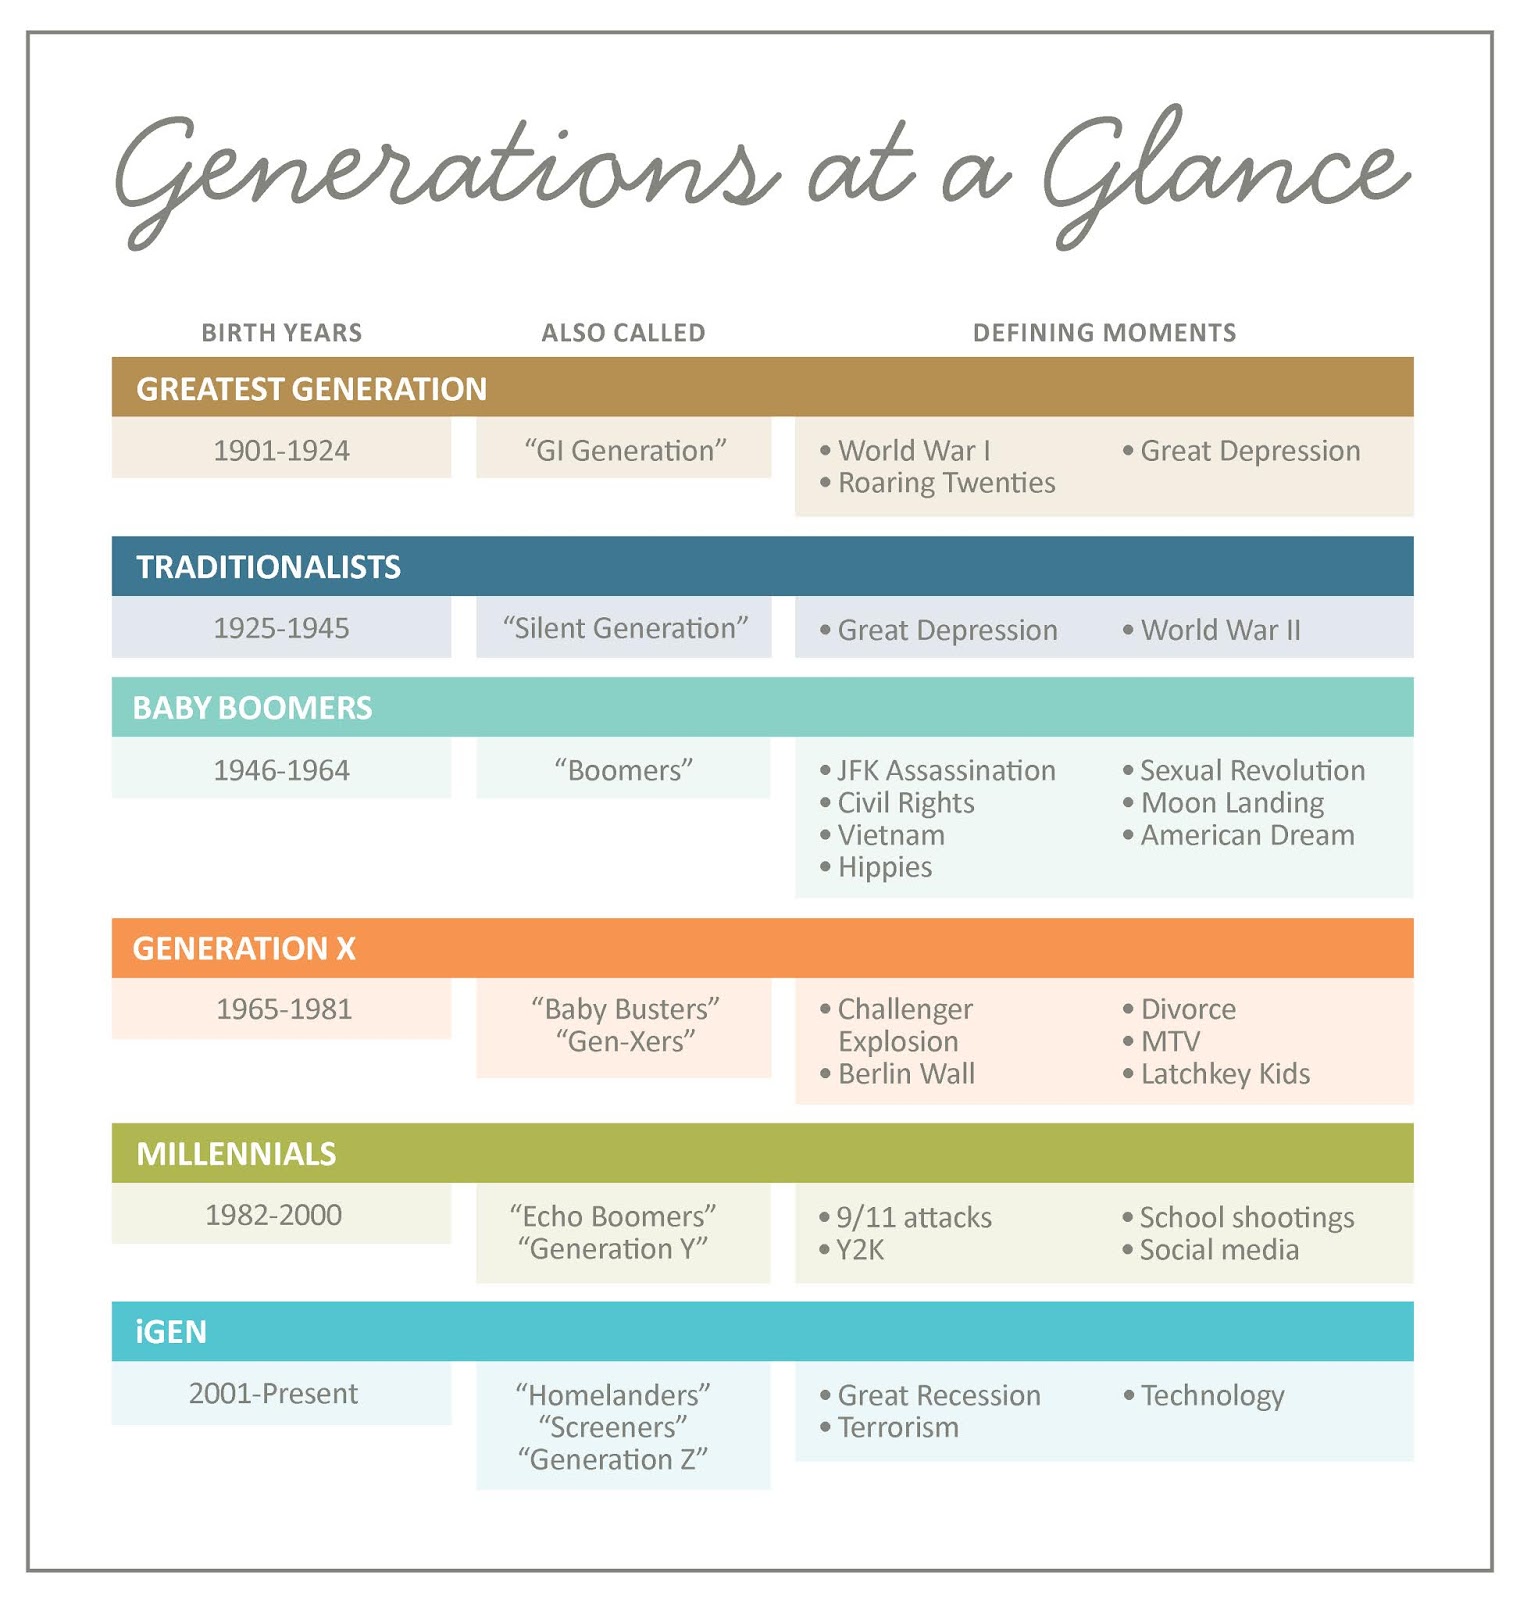 Bonnie's Books: What generation are you in?